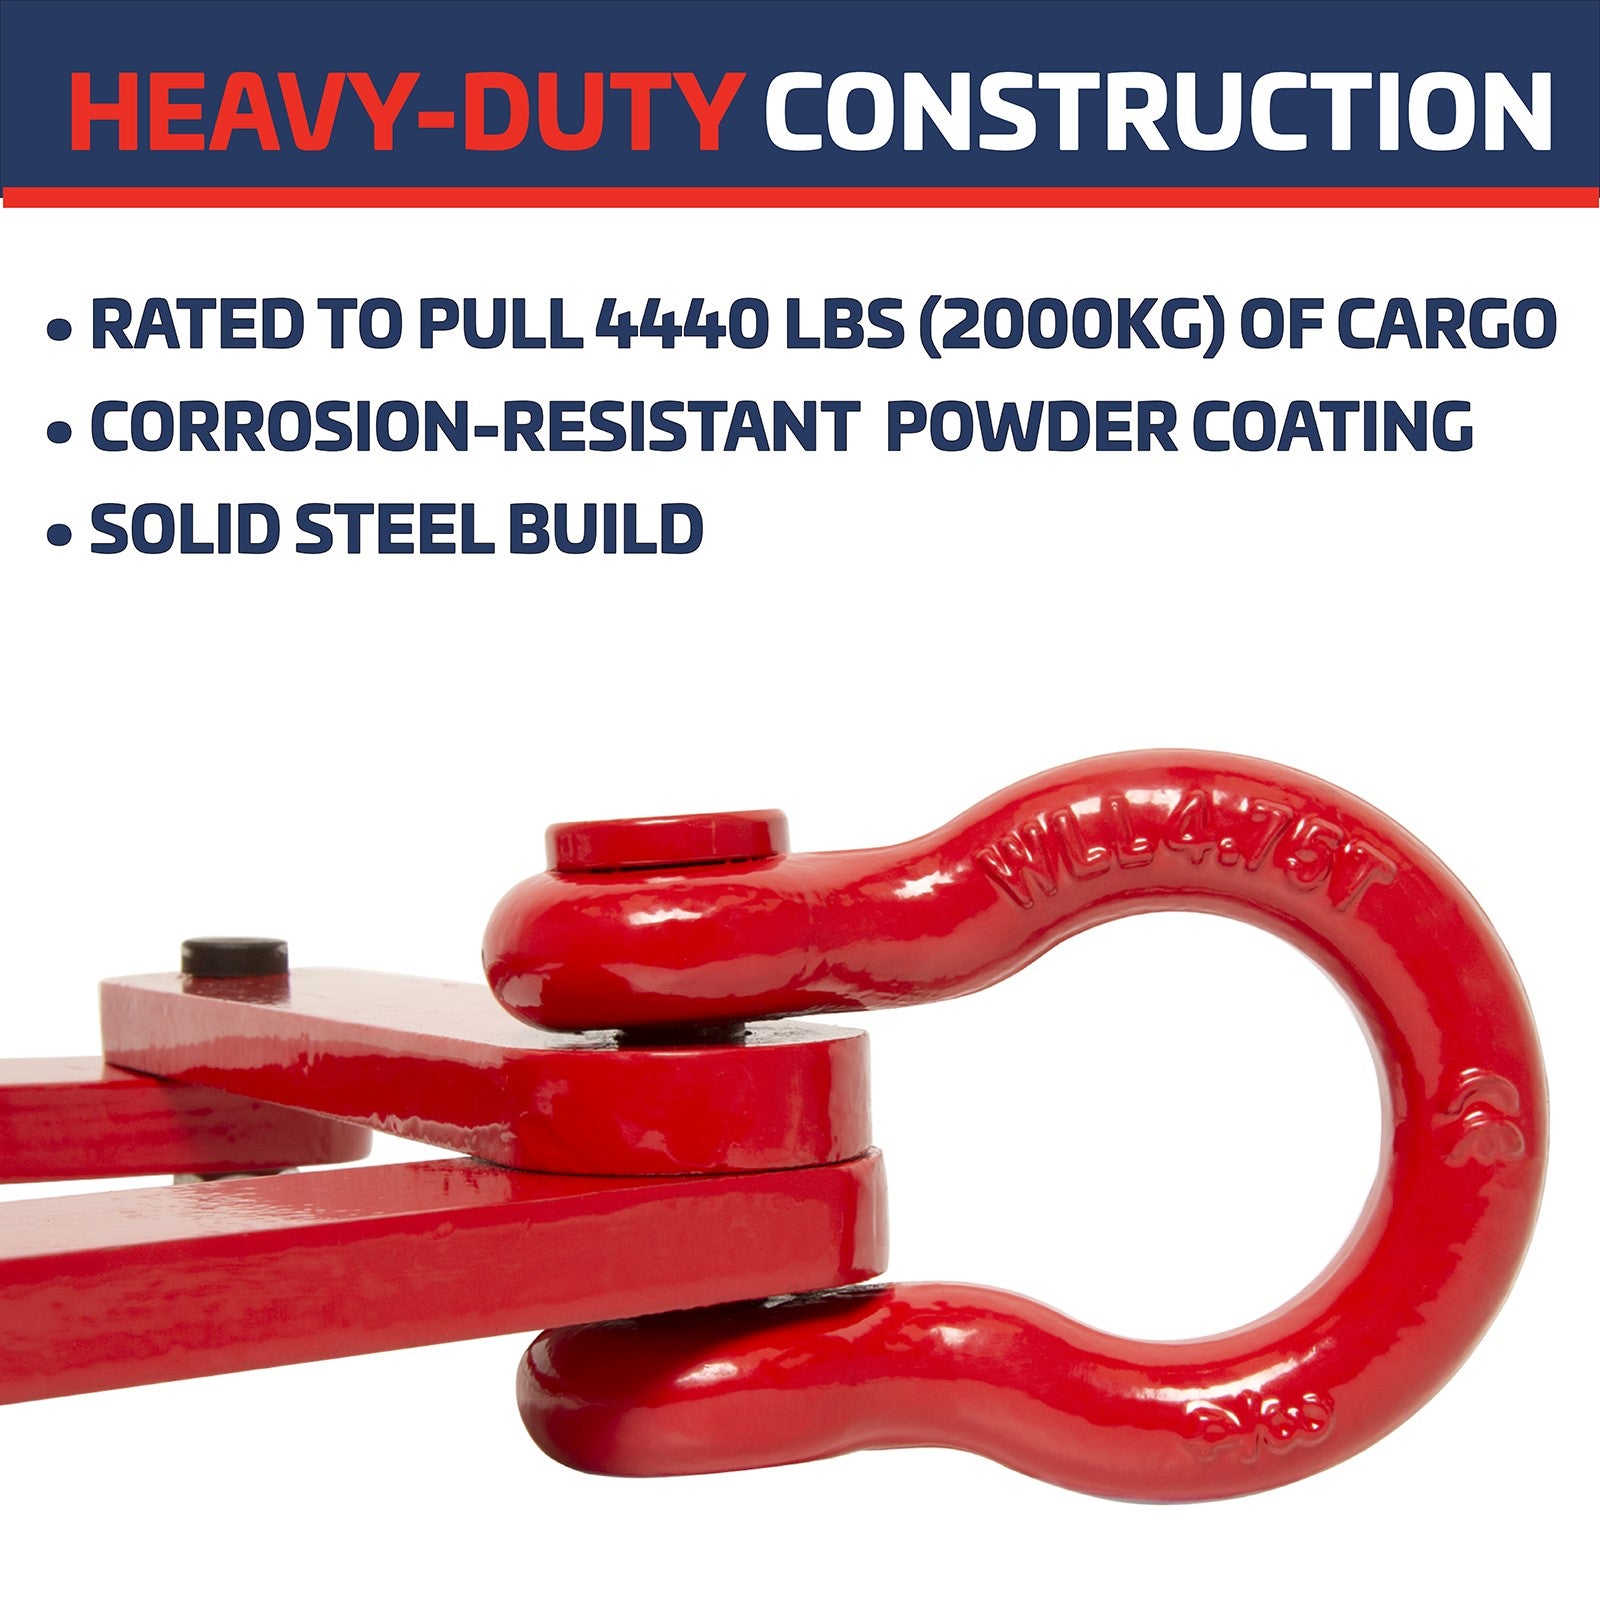 Heavy-Duty Pallet Pulling Clamp | Move Pallets Safely & Easily by JORES Technologies